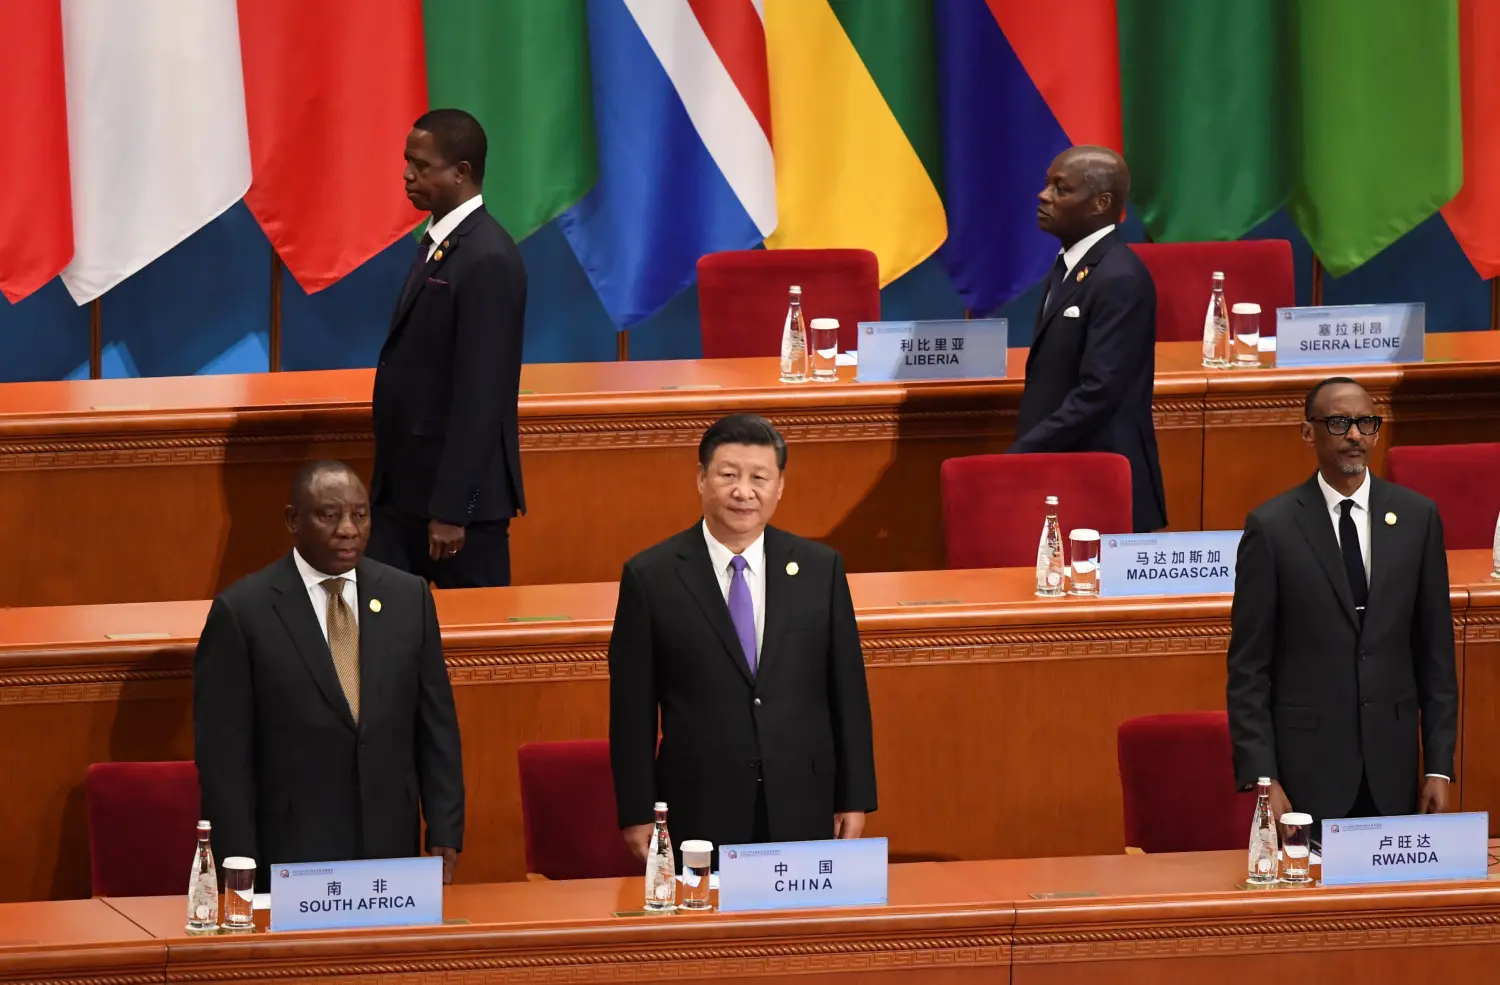 China's President Xi Jinping, front center, stands as participants arrive for the opening ceremony of the Forum on China-Africa Cooperation at the Great Hall of the People in Beijing September 3, 2018. Madoka Ikegami/POOL Via REUTERS